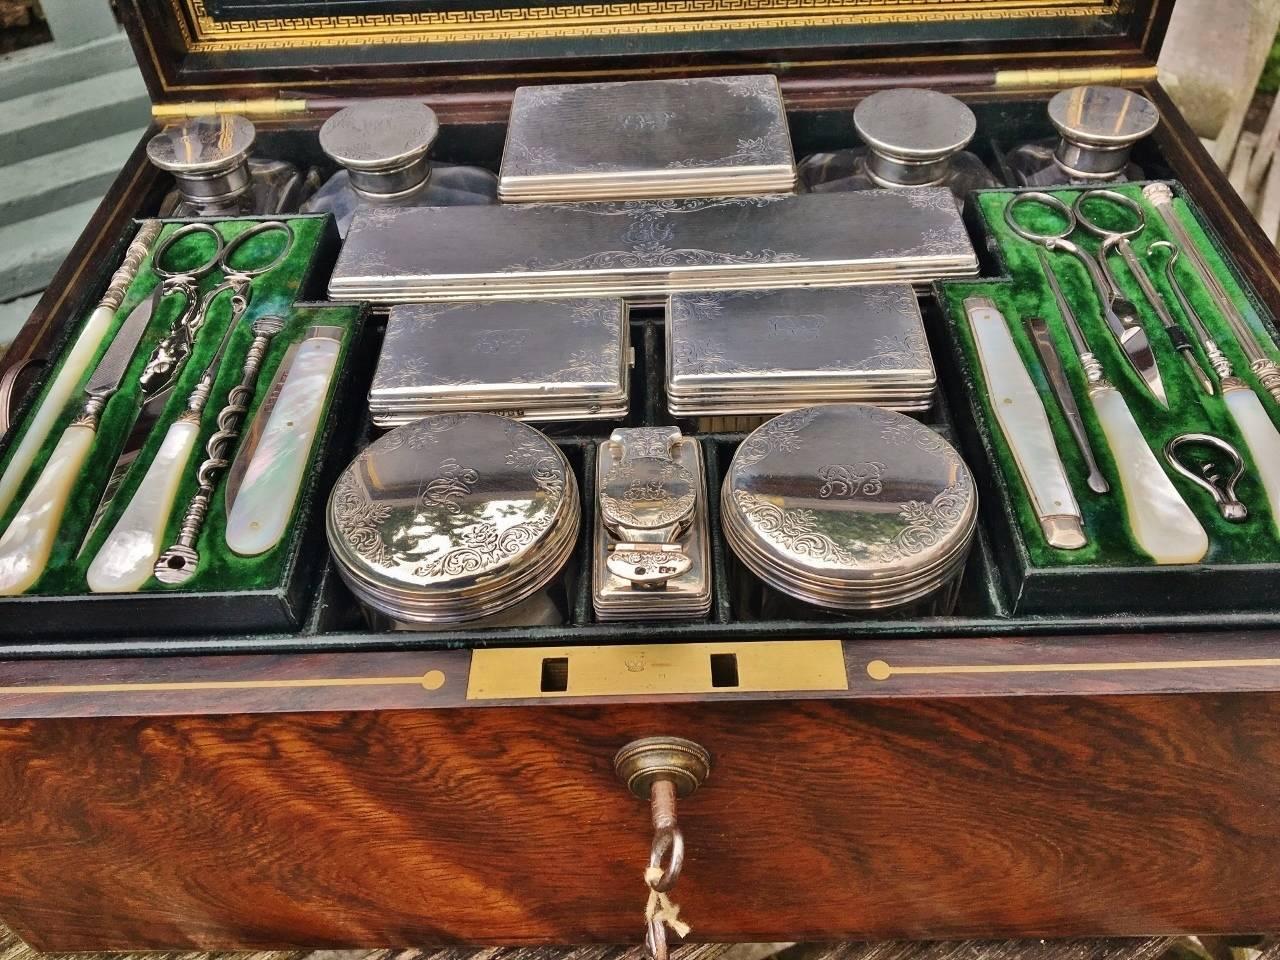 Attractive early 19th century rosewood Vanity case / travelling case, enclosing fabulous silver topped bottles, jars for creams, cologne, powders and manicure sets. English, circa 1840s. This is an important Vanity case with a London maker, full of